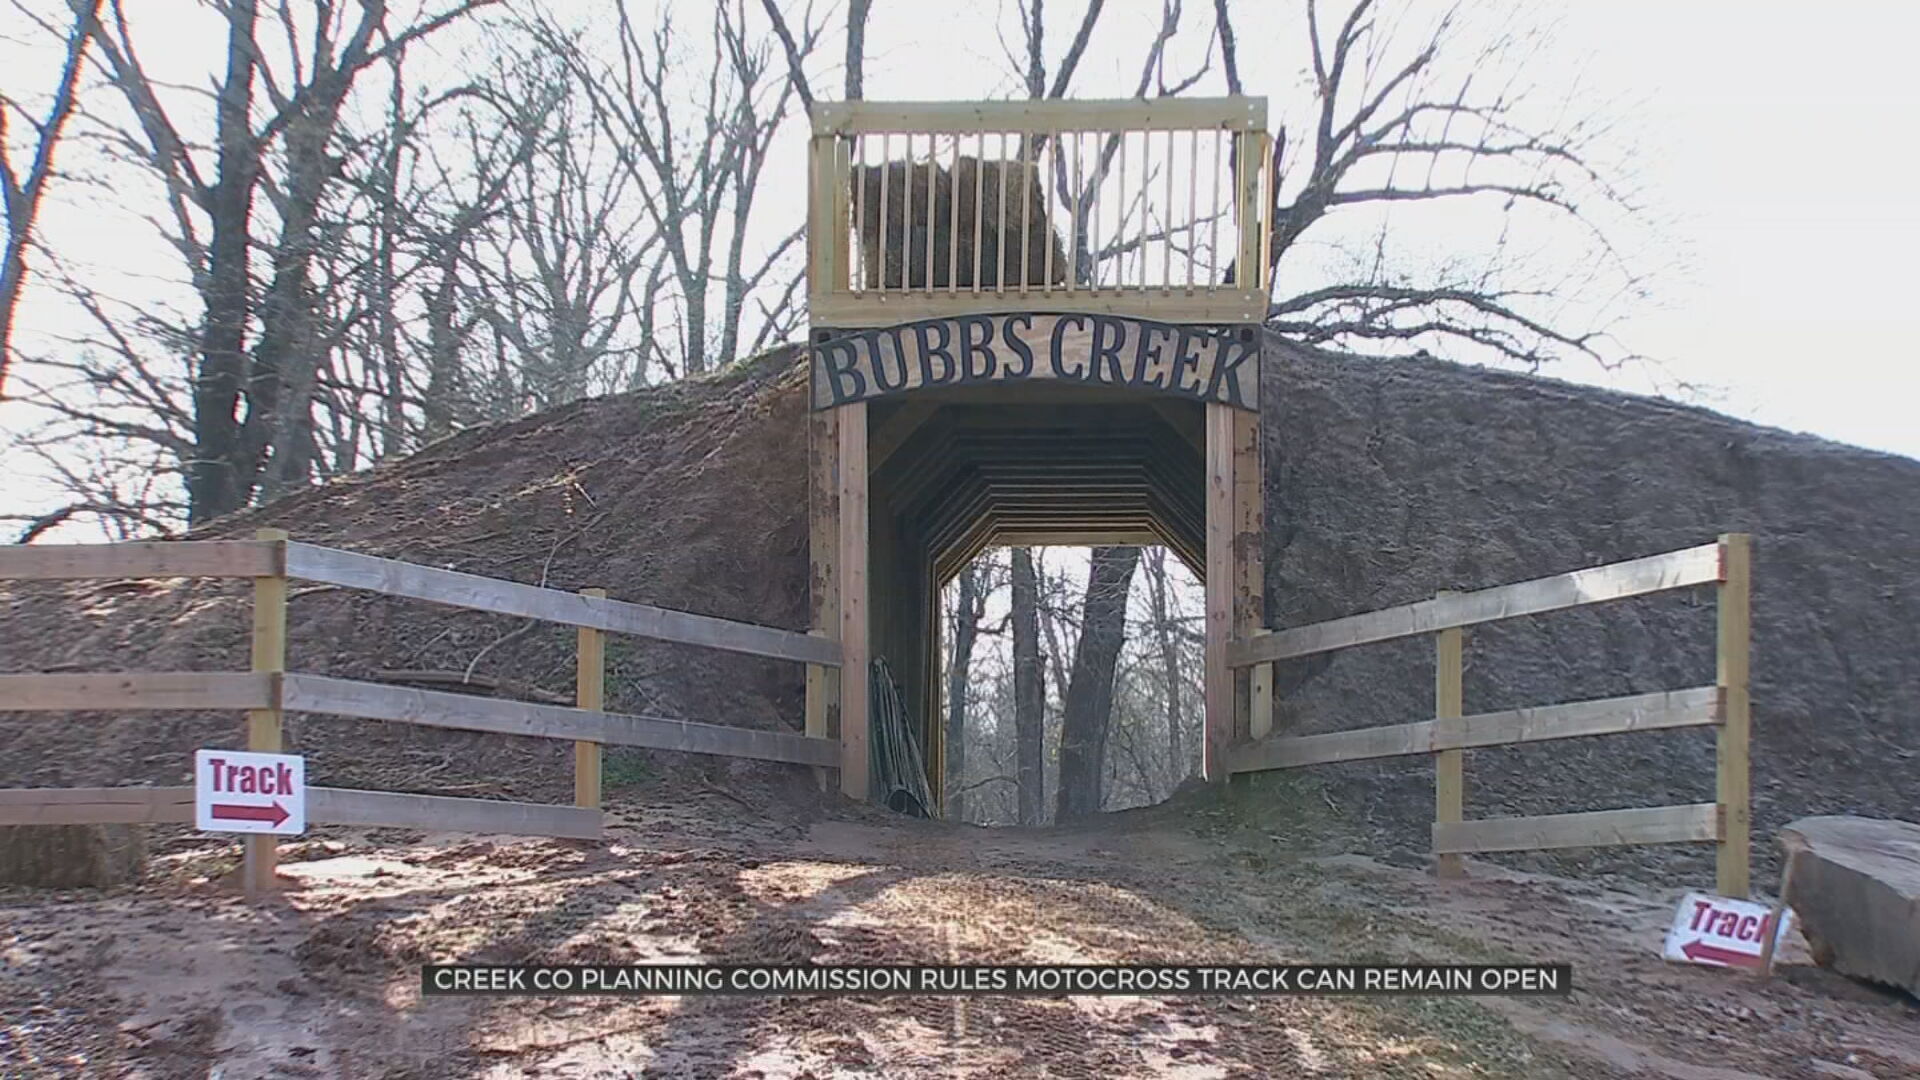 Creek Co. Family-Run Motocross Track To Remain Open After Neighbor Complaints 